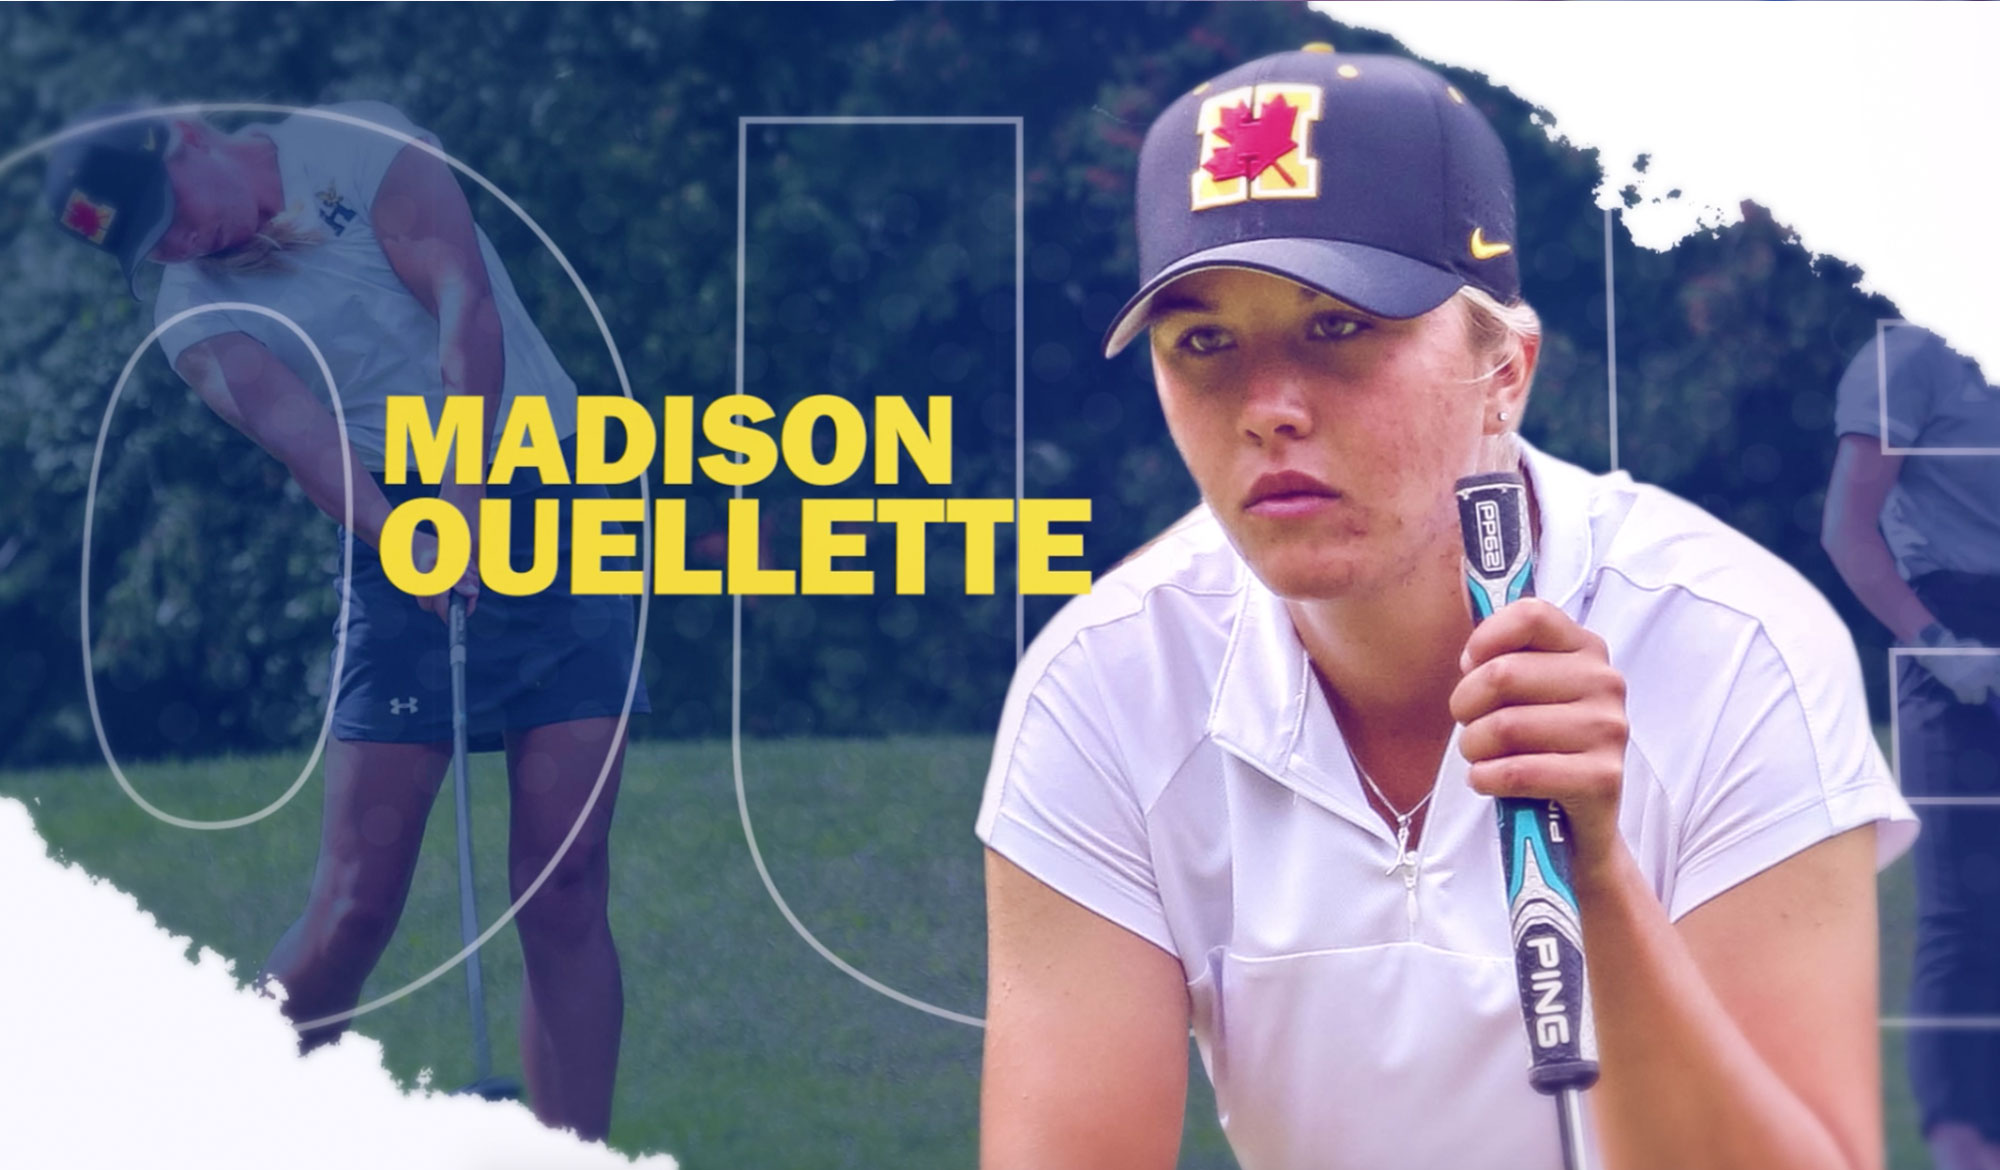 Madison Ouellette Rookie of the Year